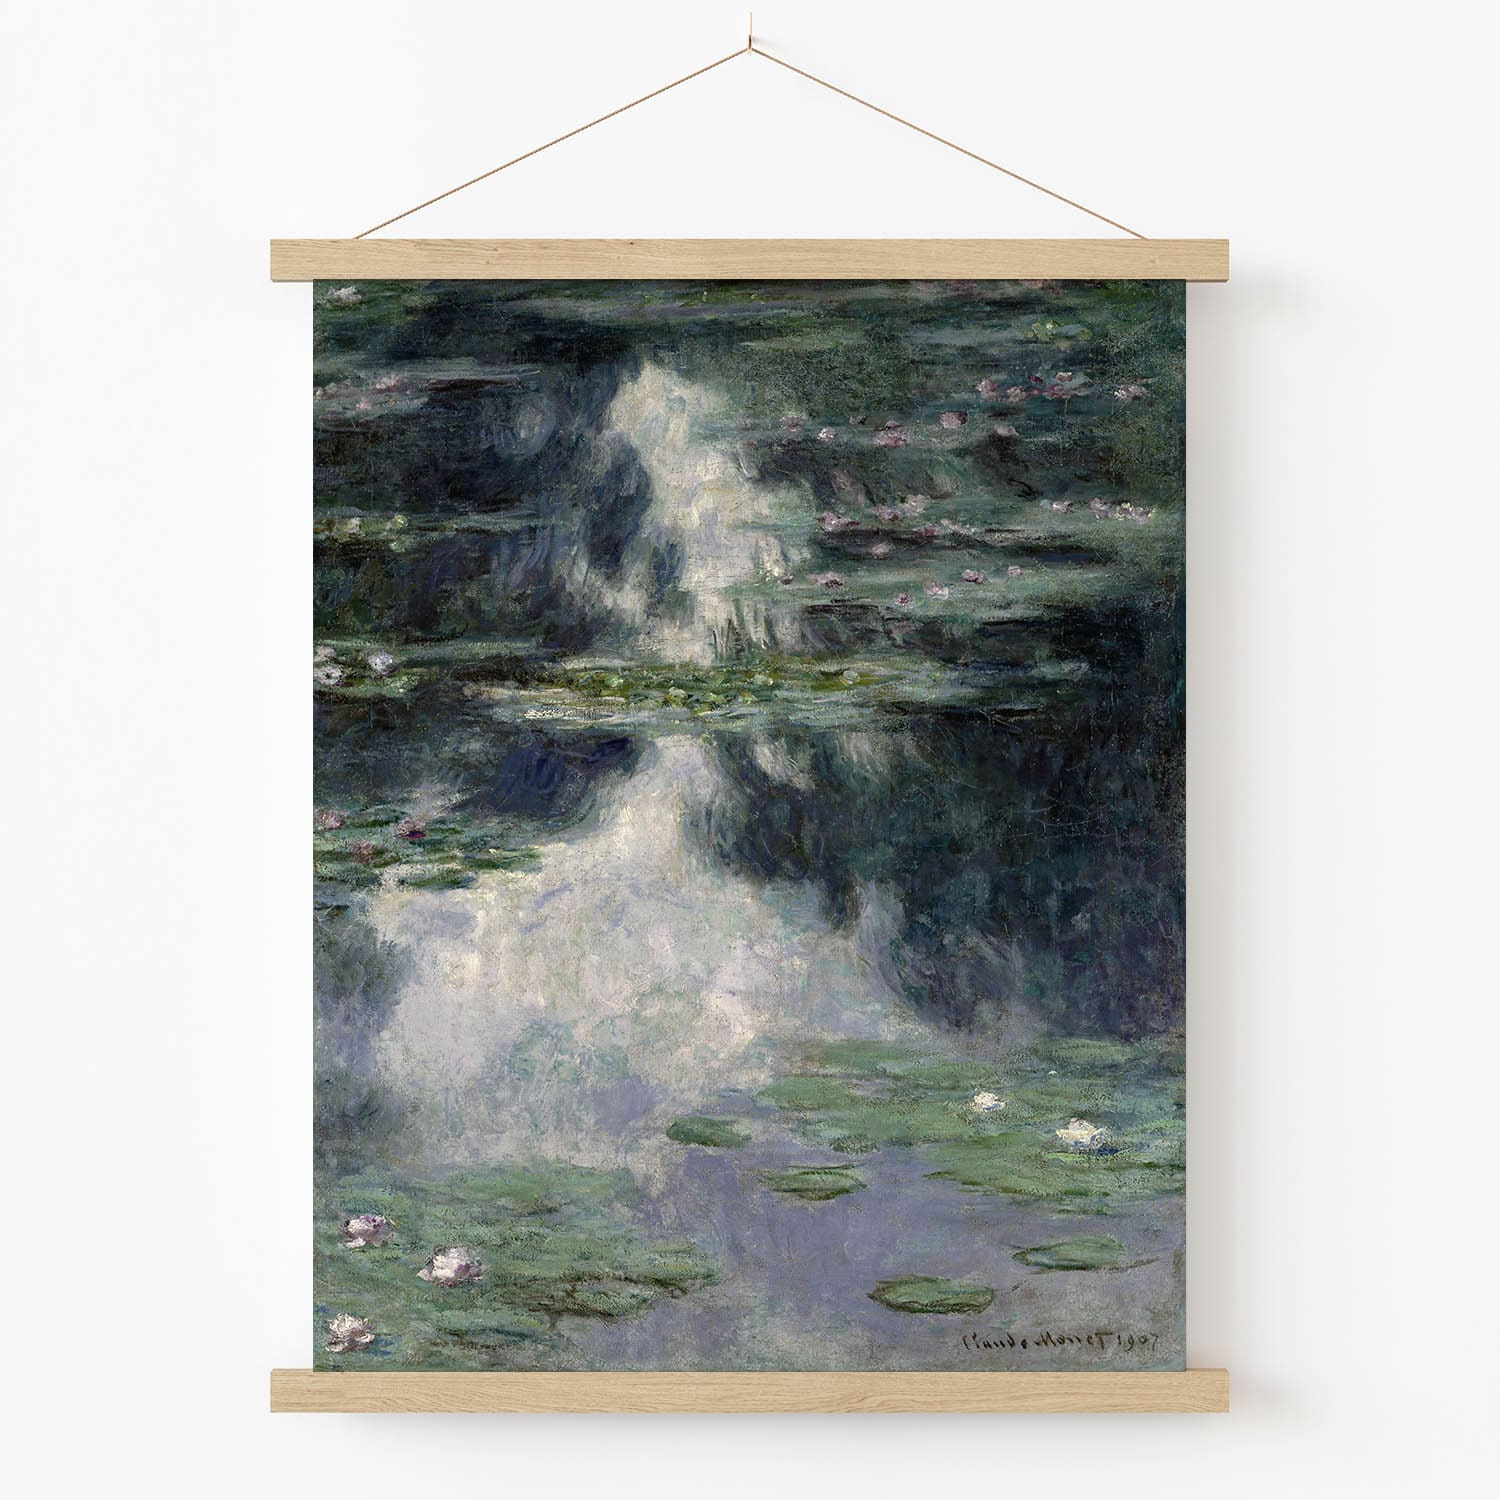 Muted Water with Lillies Art Print in Wood Hanger Frame on Wall